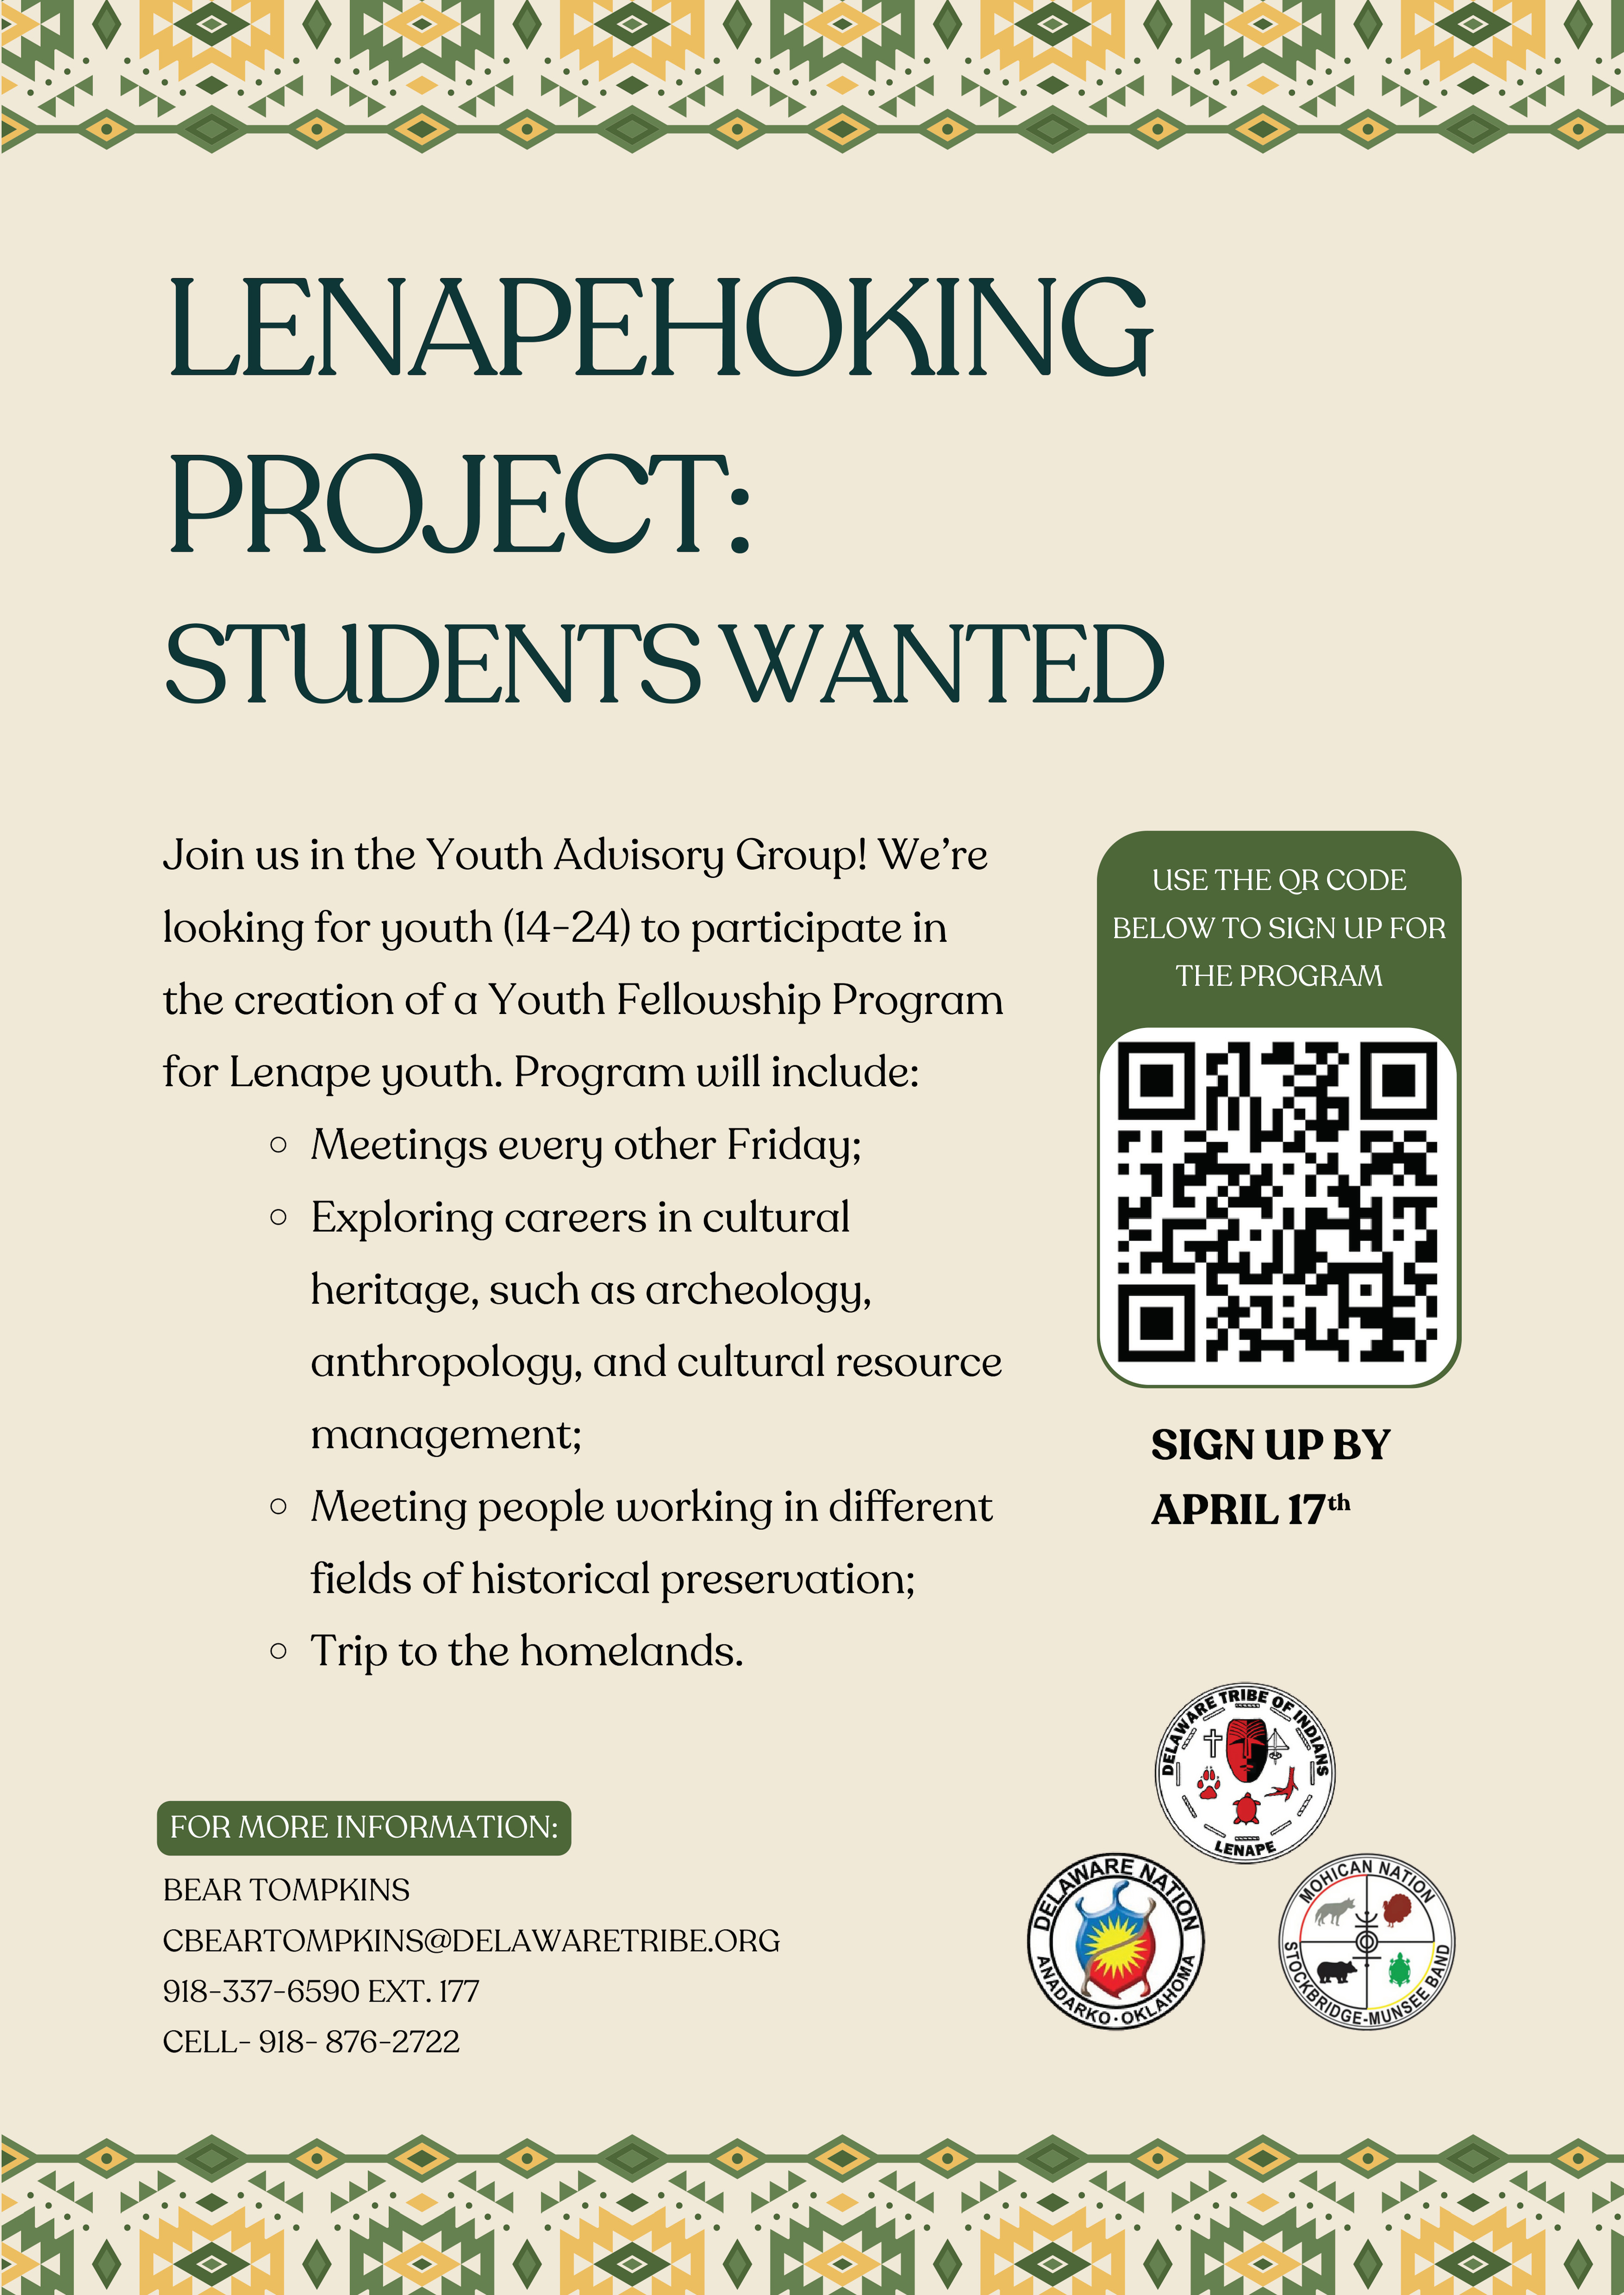 Join us in the Youth Advisory Group! We're looking for youth to participate in historical revitalization of the Lenape culture. This program includes:

       Meetings every other Friday
       Learn about and participate in historical preservation
       Meet people working in different fields of historical preservation
       Trips to professional conferences related to historical preservation
       Trip to the homelands


For more information contact:

Bear Tompkins
cbeartompkins@delawaretribe.org
(918) 337-6590 ext. 177
M - F 3 P.M. - 5 P.M. Office Hours